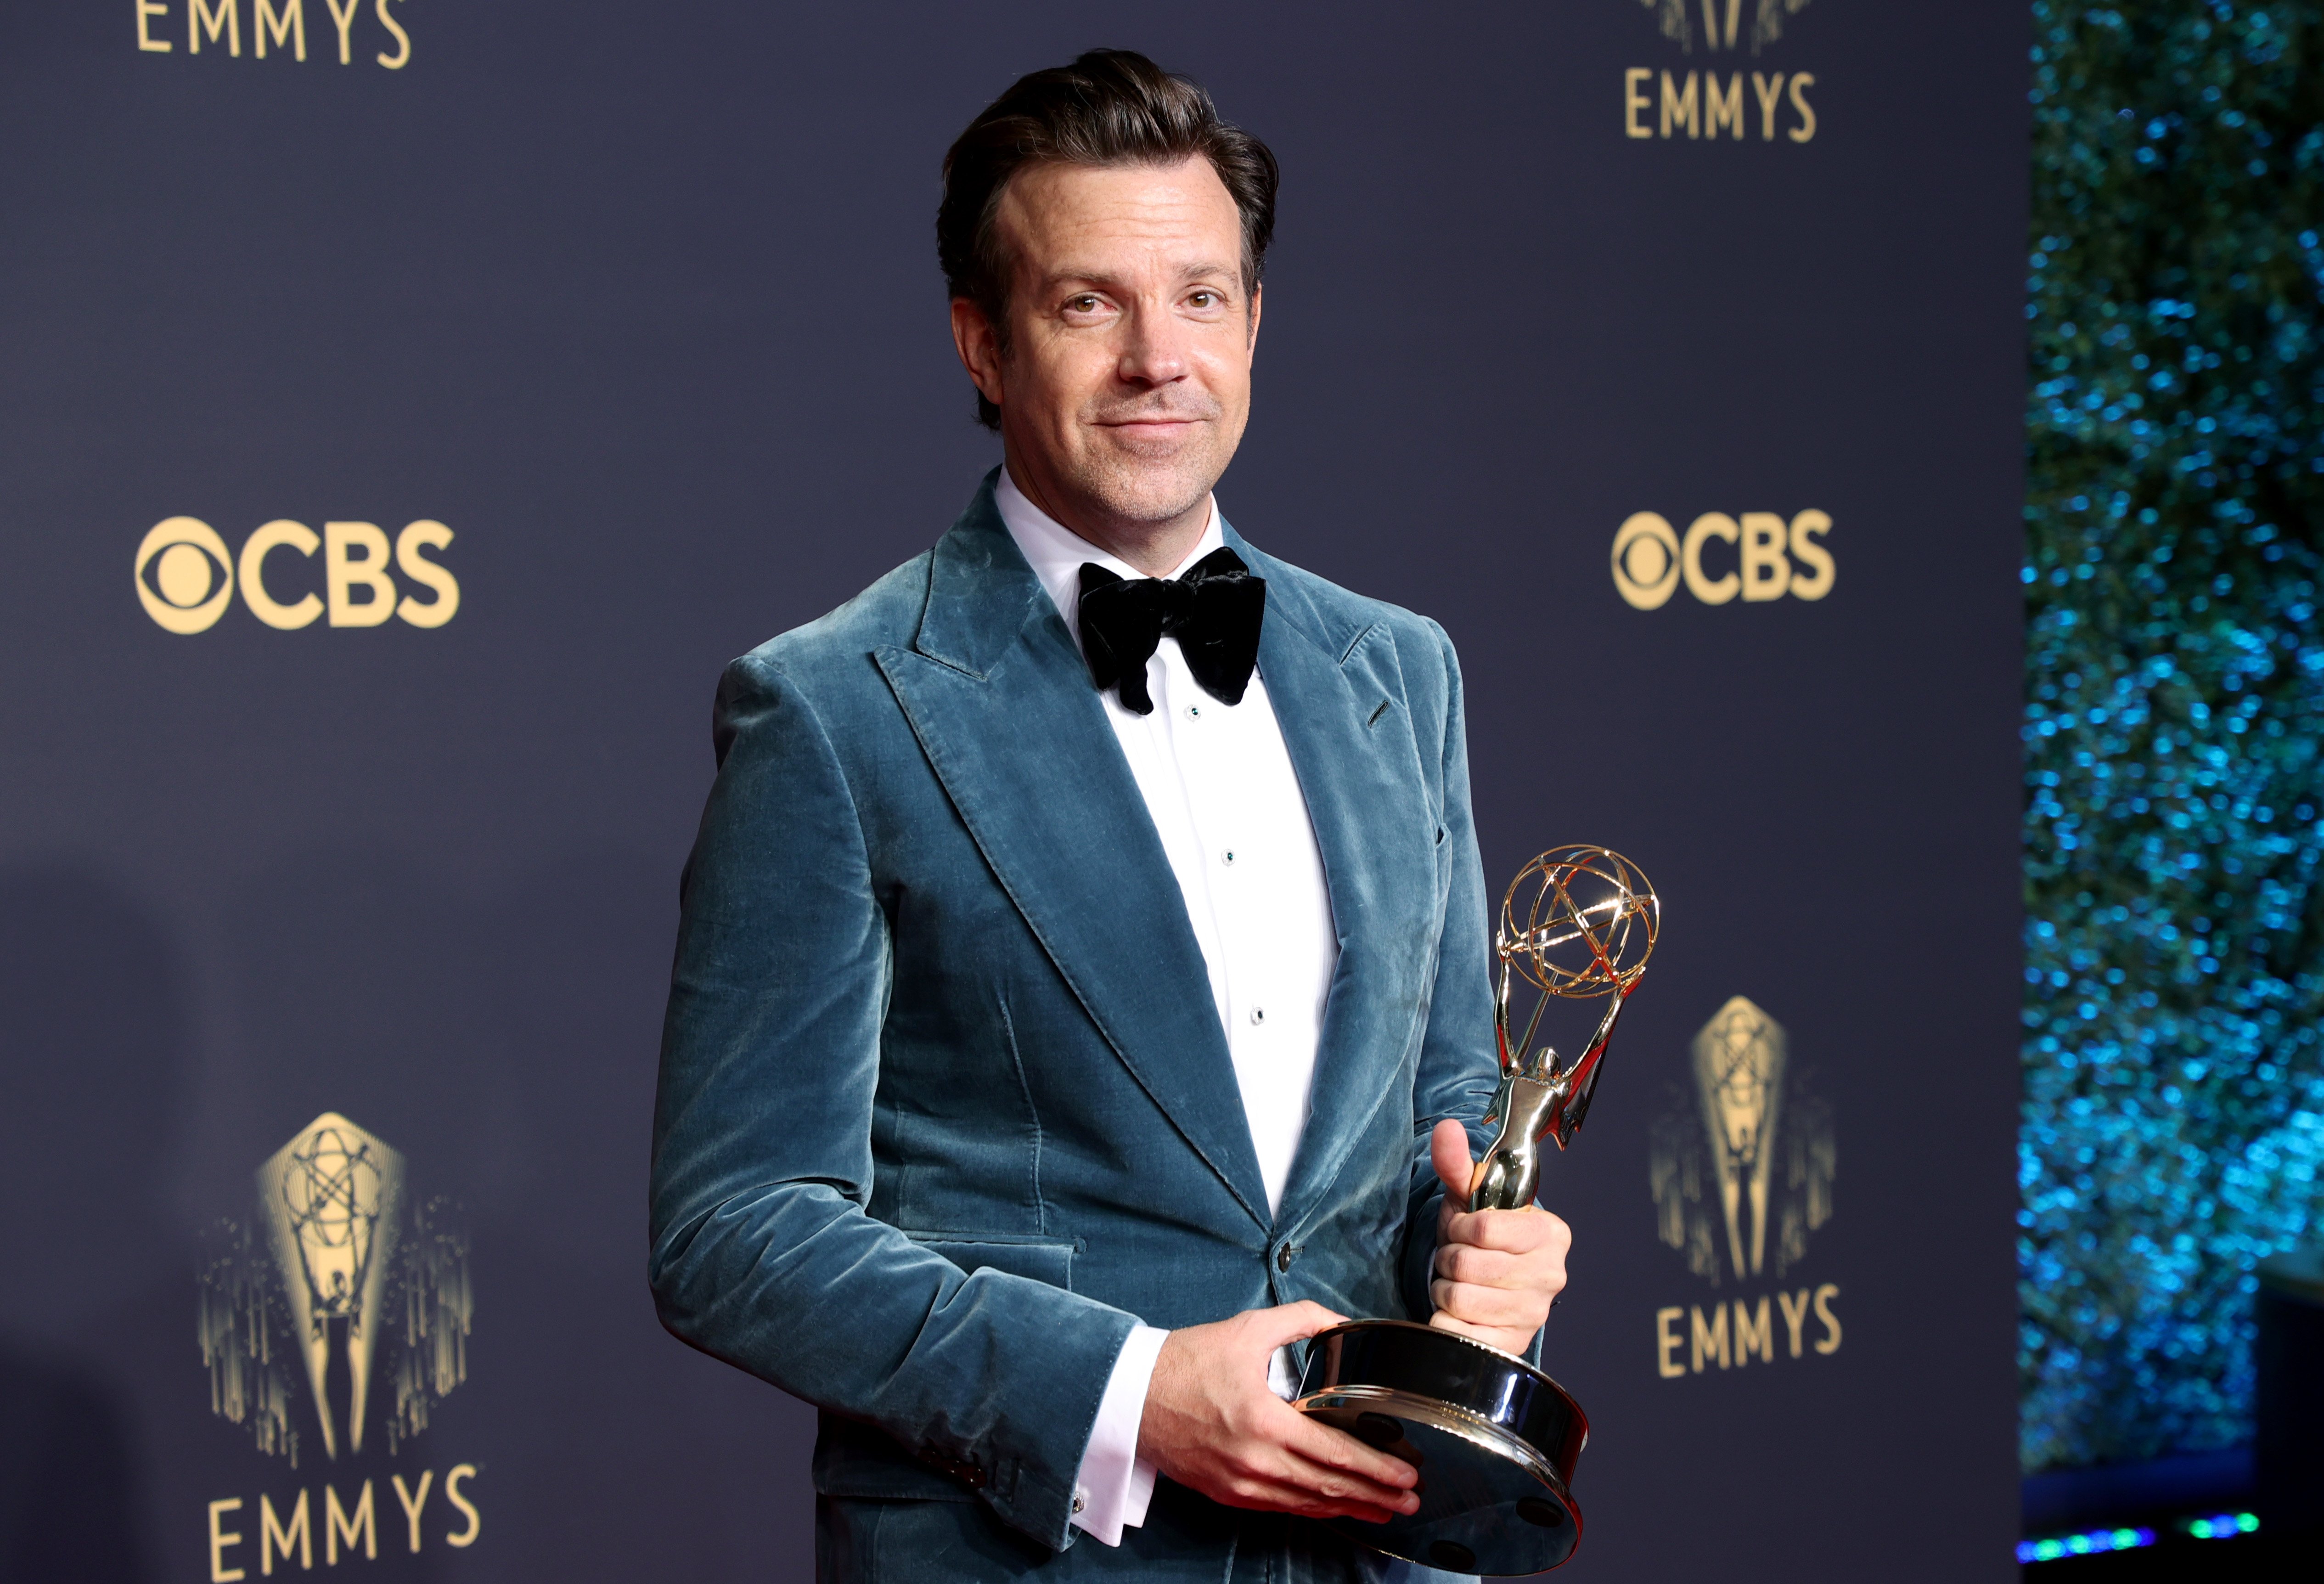 Jason Sudeikis at the Primetime Emmy Awards on September 19, 2021 in Los Angeles where he won Outstanding Lead Actor in a Comedy Series for “Ted Lasso” | Source: Getty Images